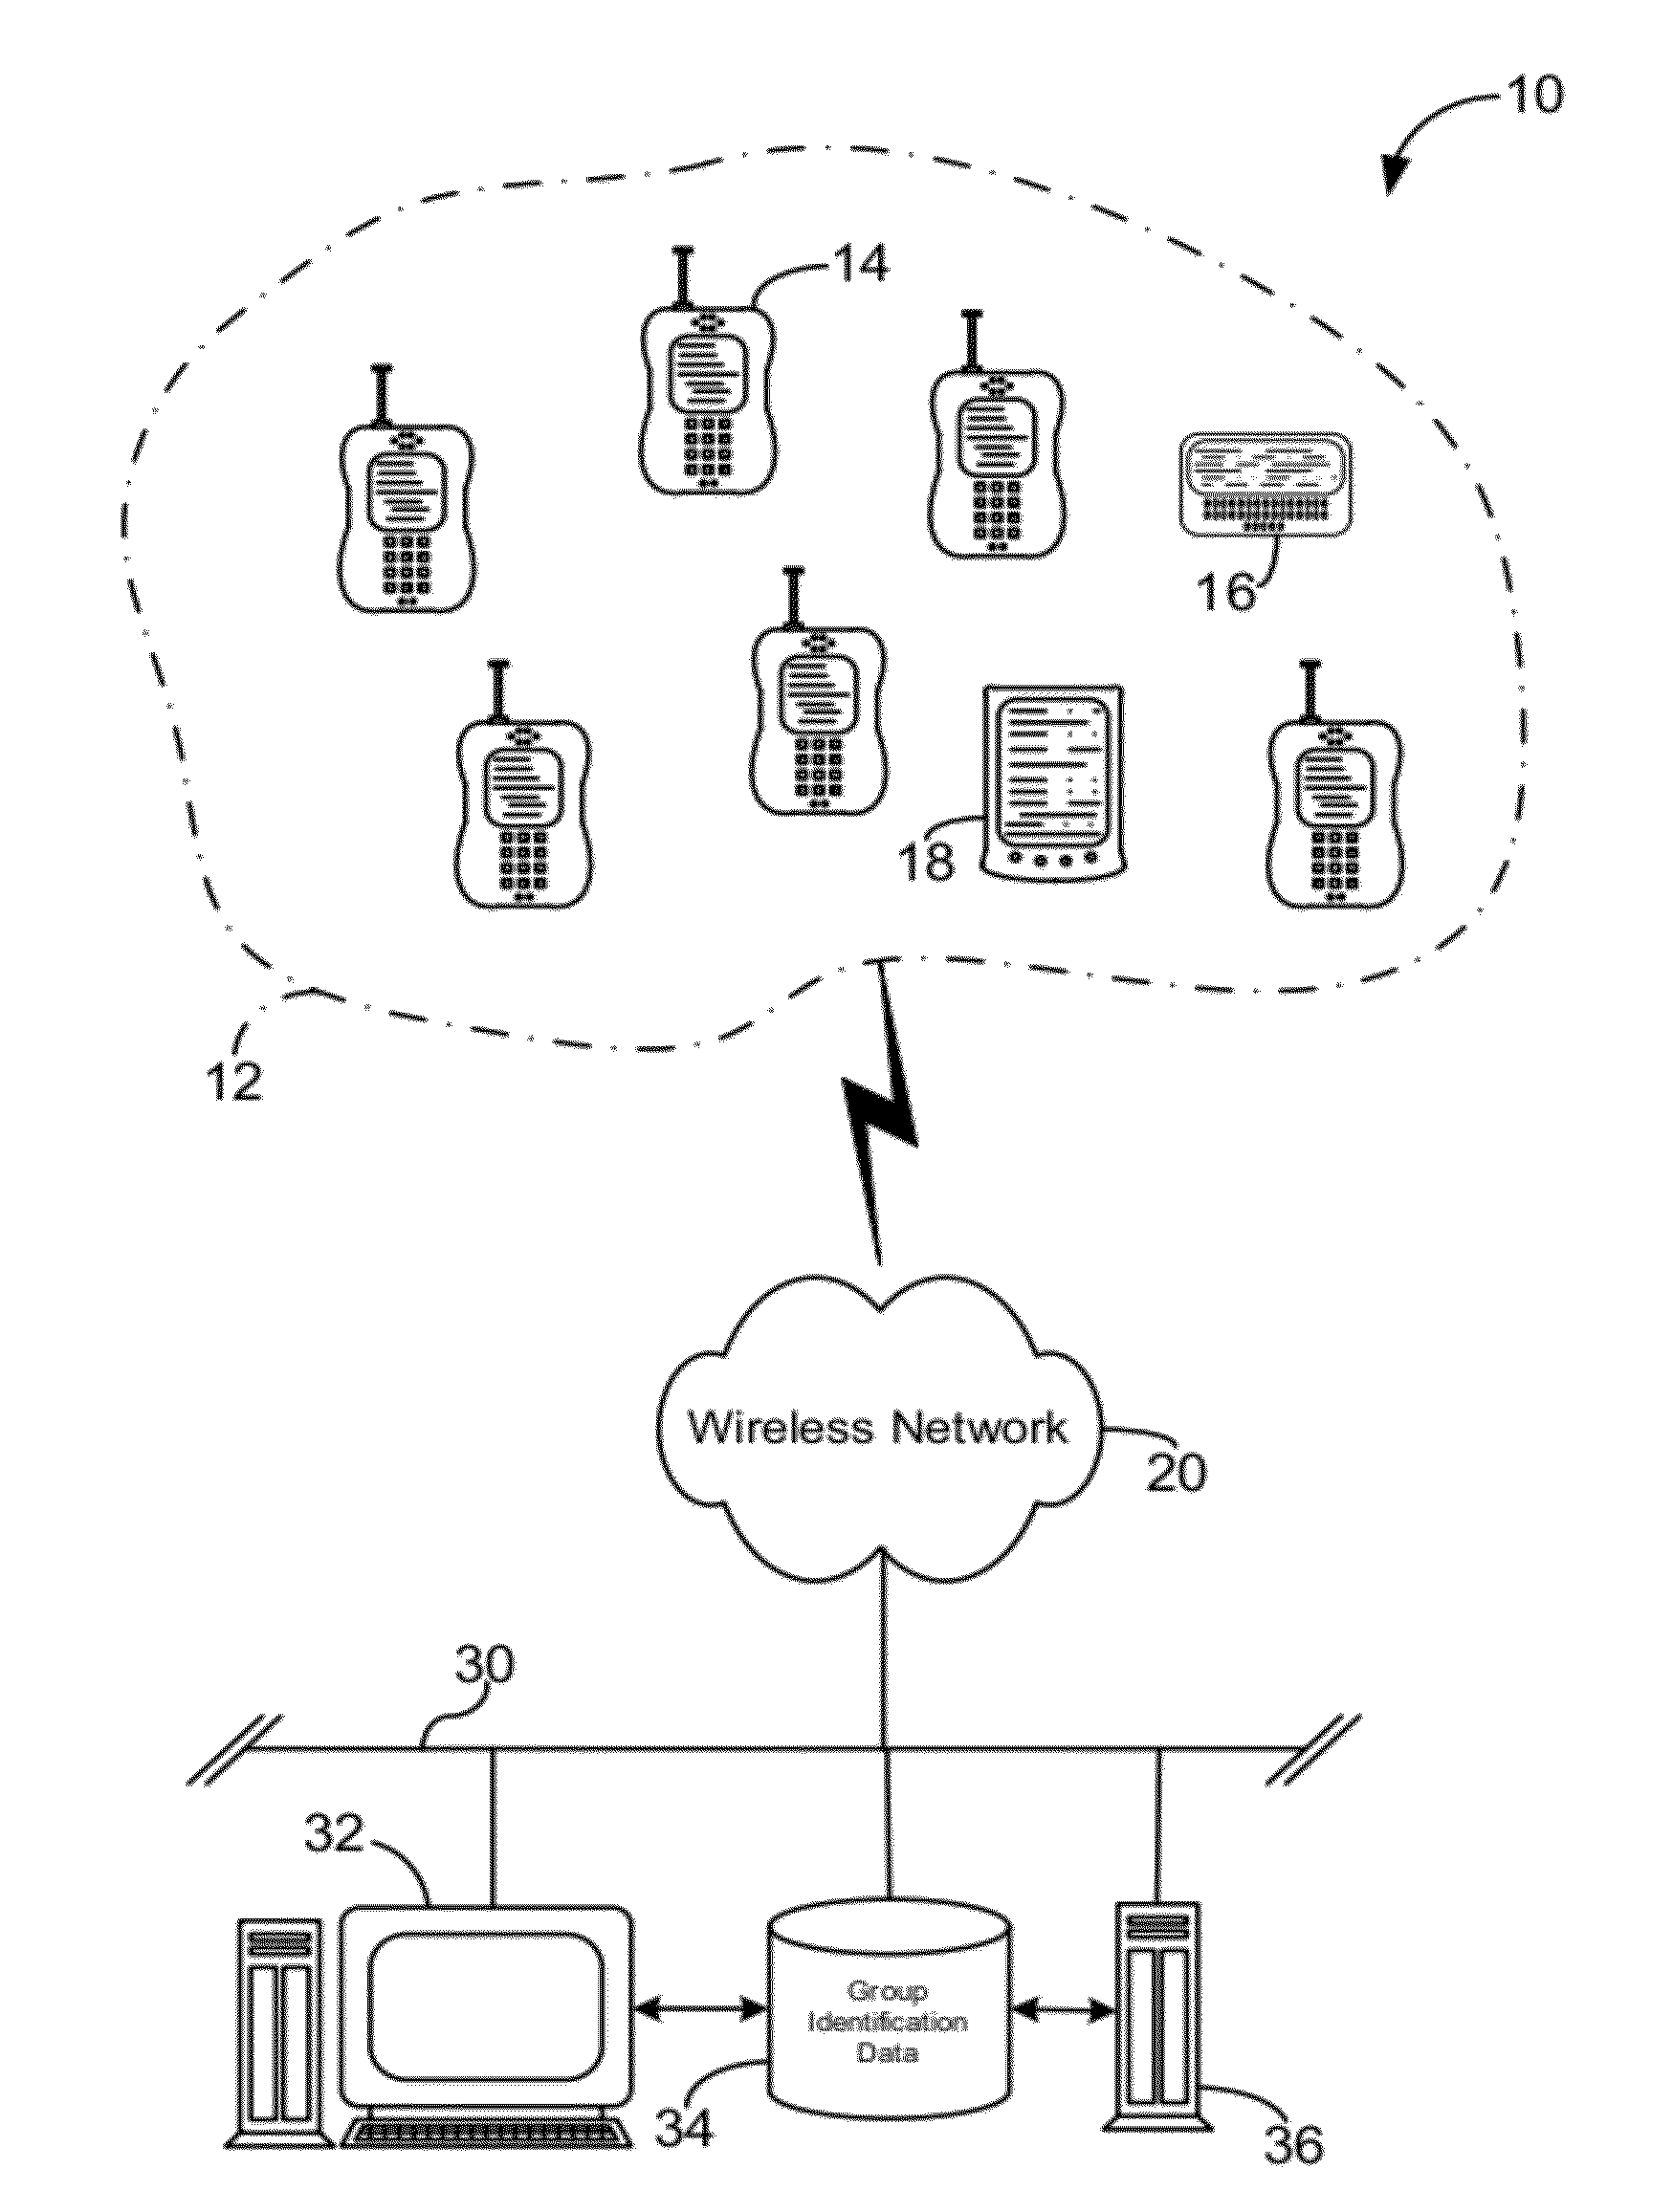 Adaptive automatic detail diagnostic log collection in a wireless communication system